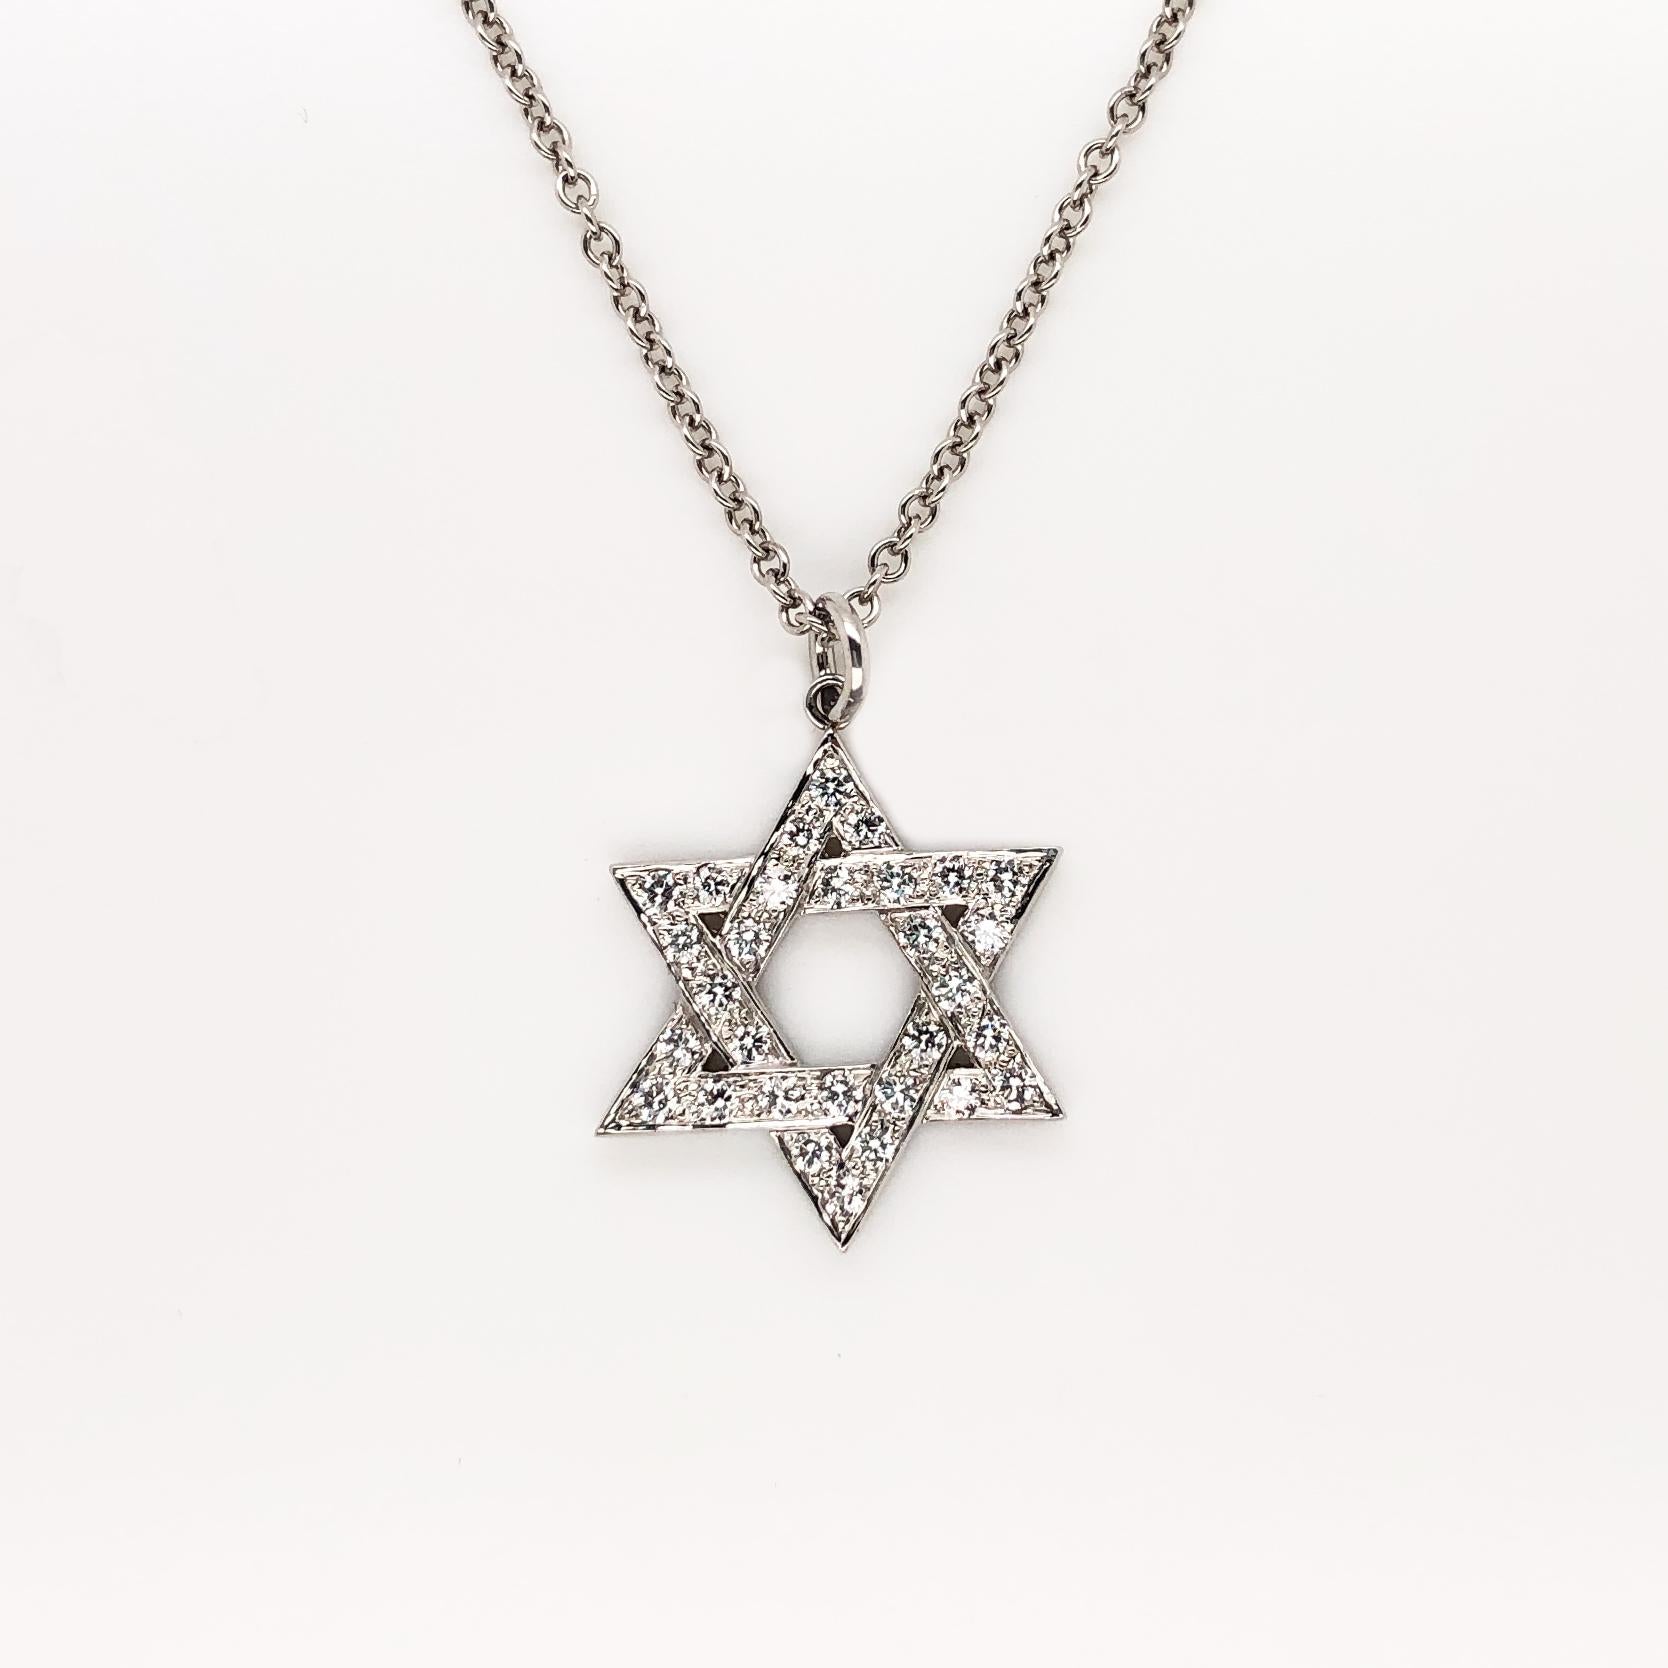 Oscar Heyman platinum Star of David necklace contains 30 round diamonds (0.48cts, F-G/ VS) on an 18'' chain. It is stamped with the makers mark, IRID PLAT, and serial number 903044. The star itself measures 3/4'' in diameter.

Oscar Heyman was